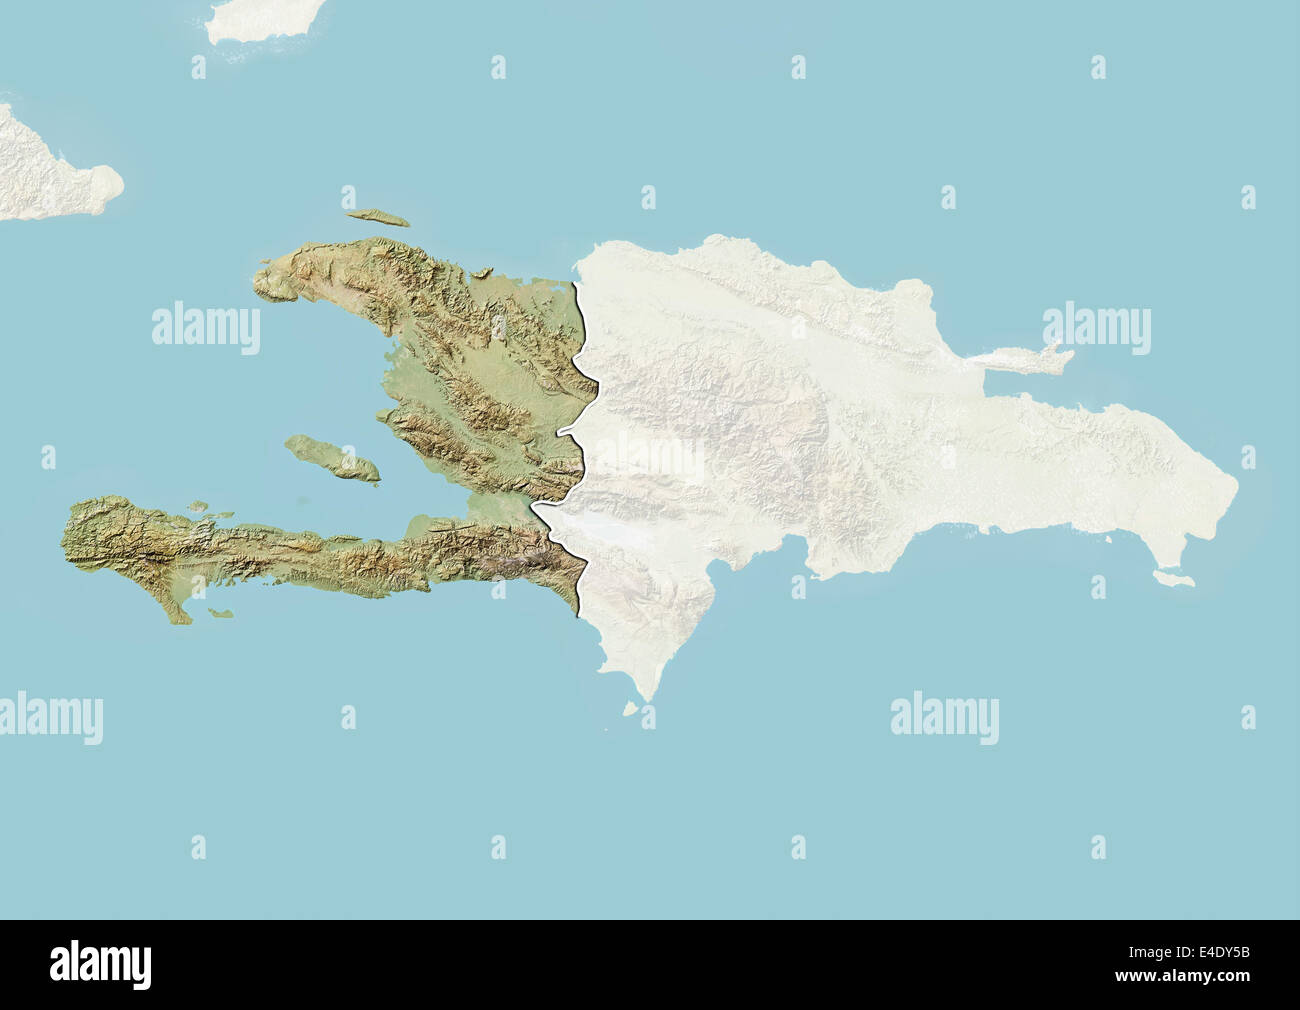 https://c8.alamy.com/comp/E4DY5B/haiti-relief-map-with-border-and-mask-E4DY5B.jpg